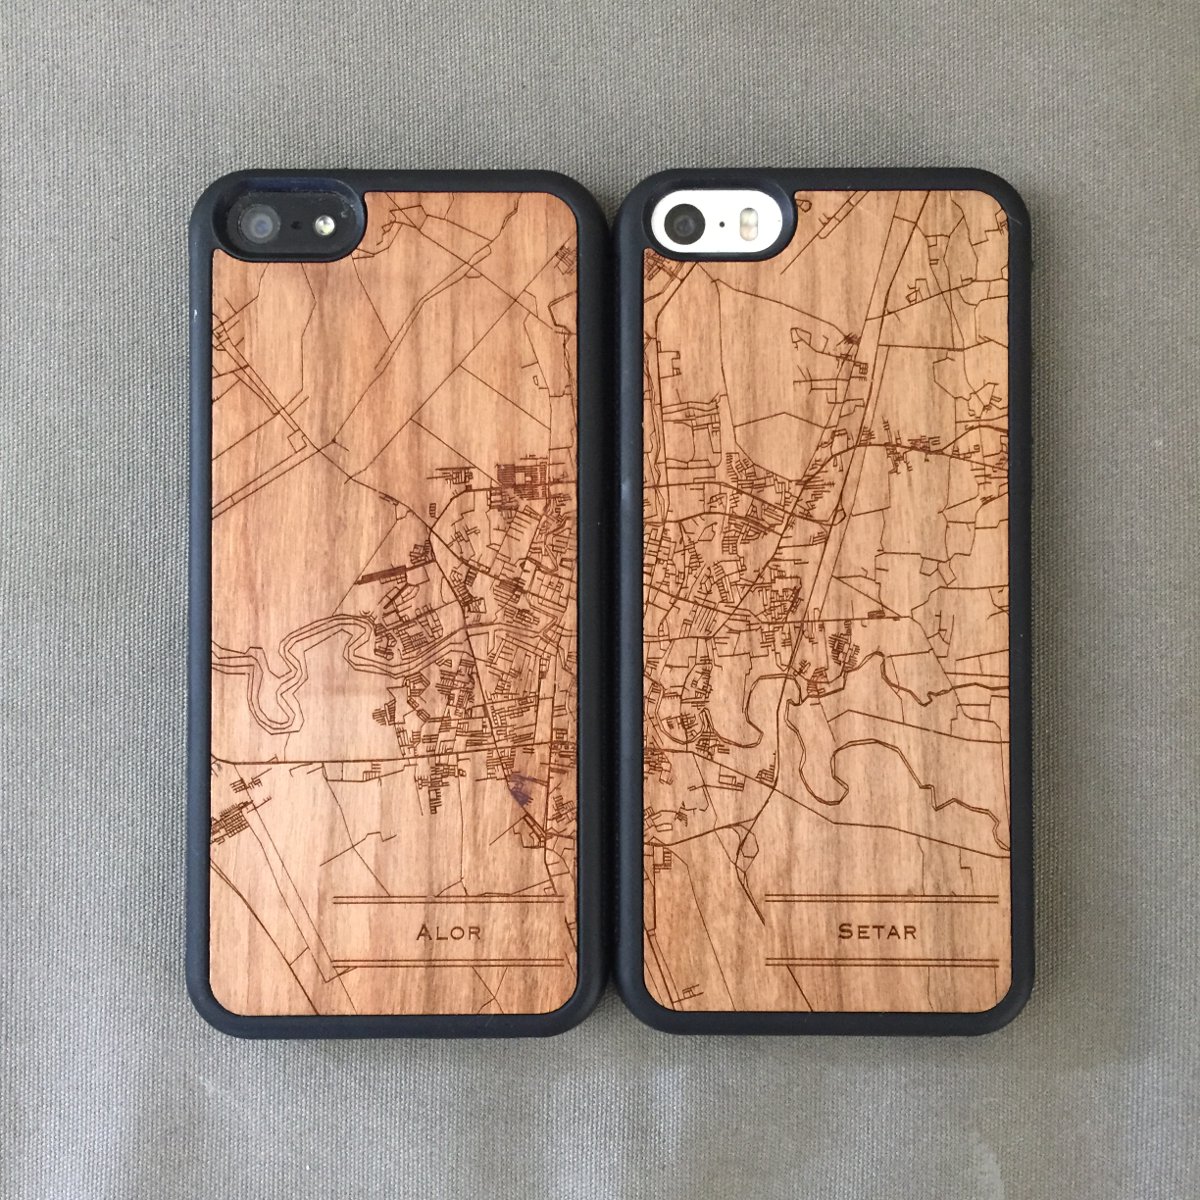 Alor Setar Carved Wood Map Matching Phone Cases